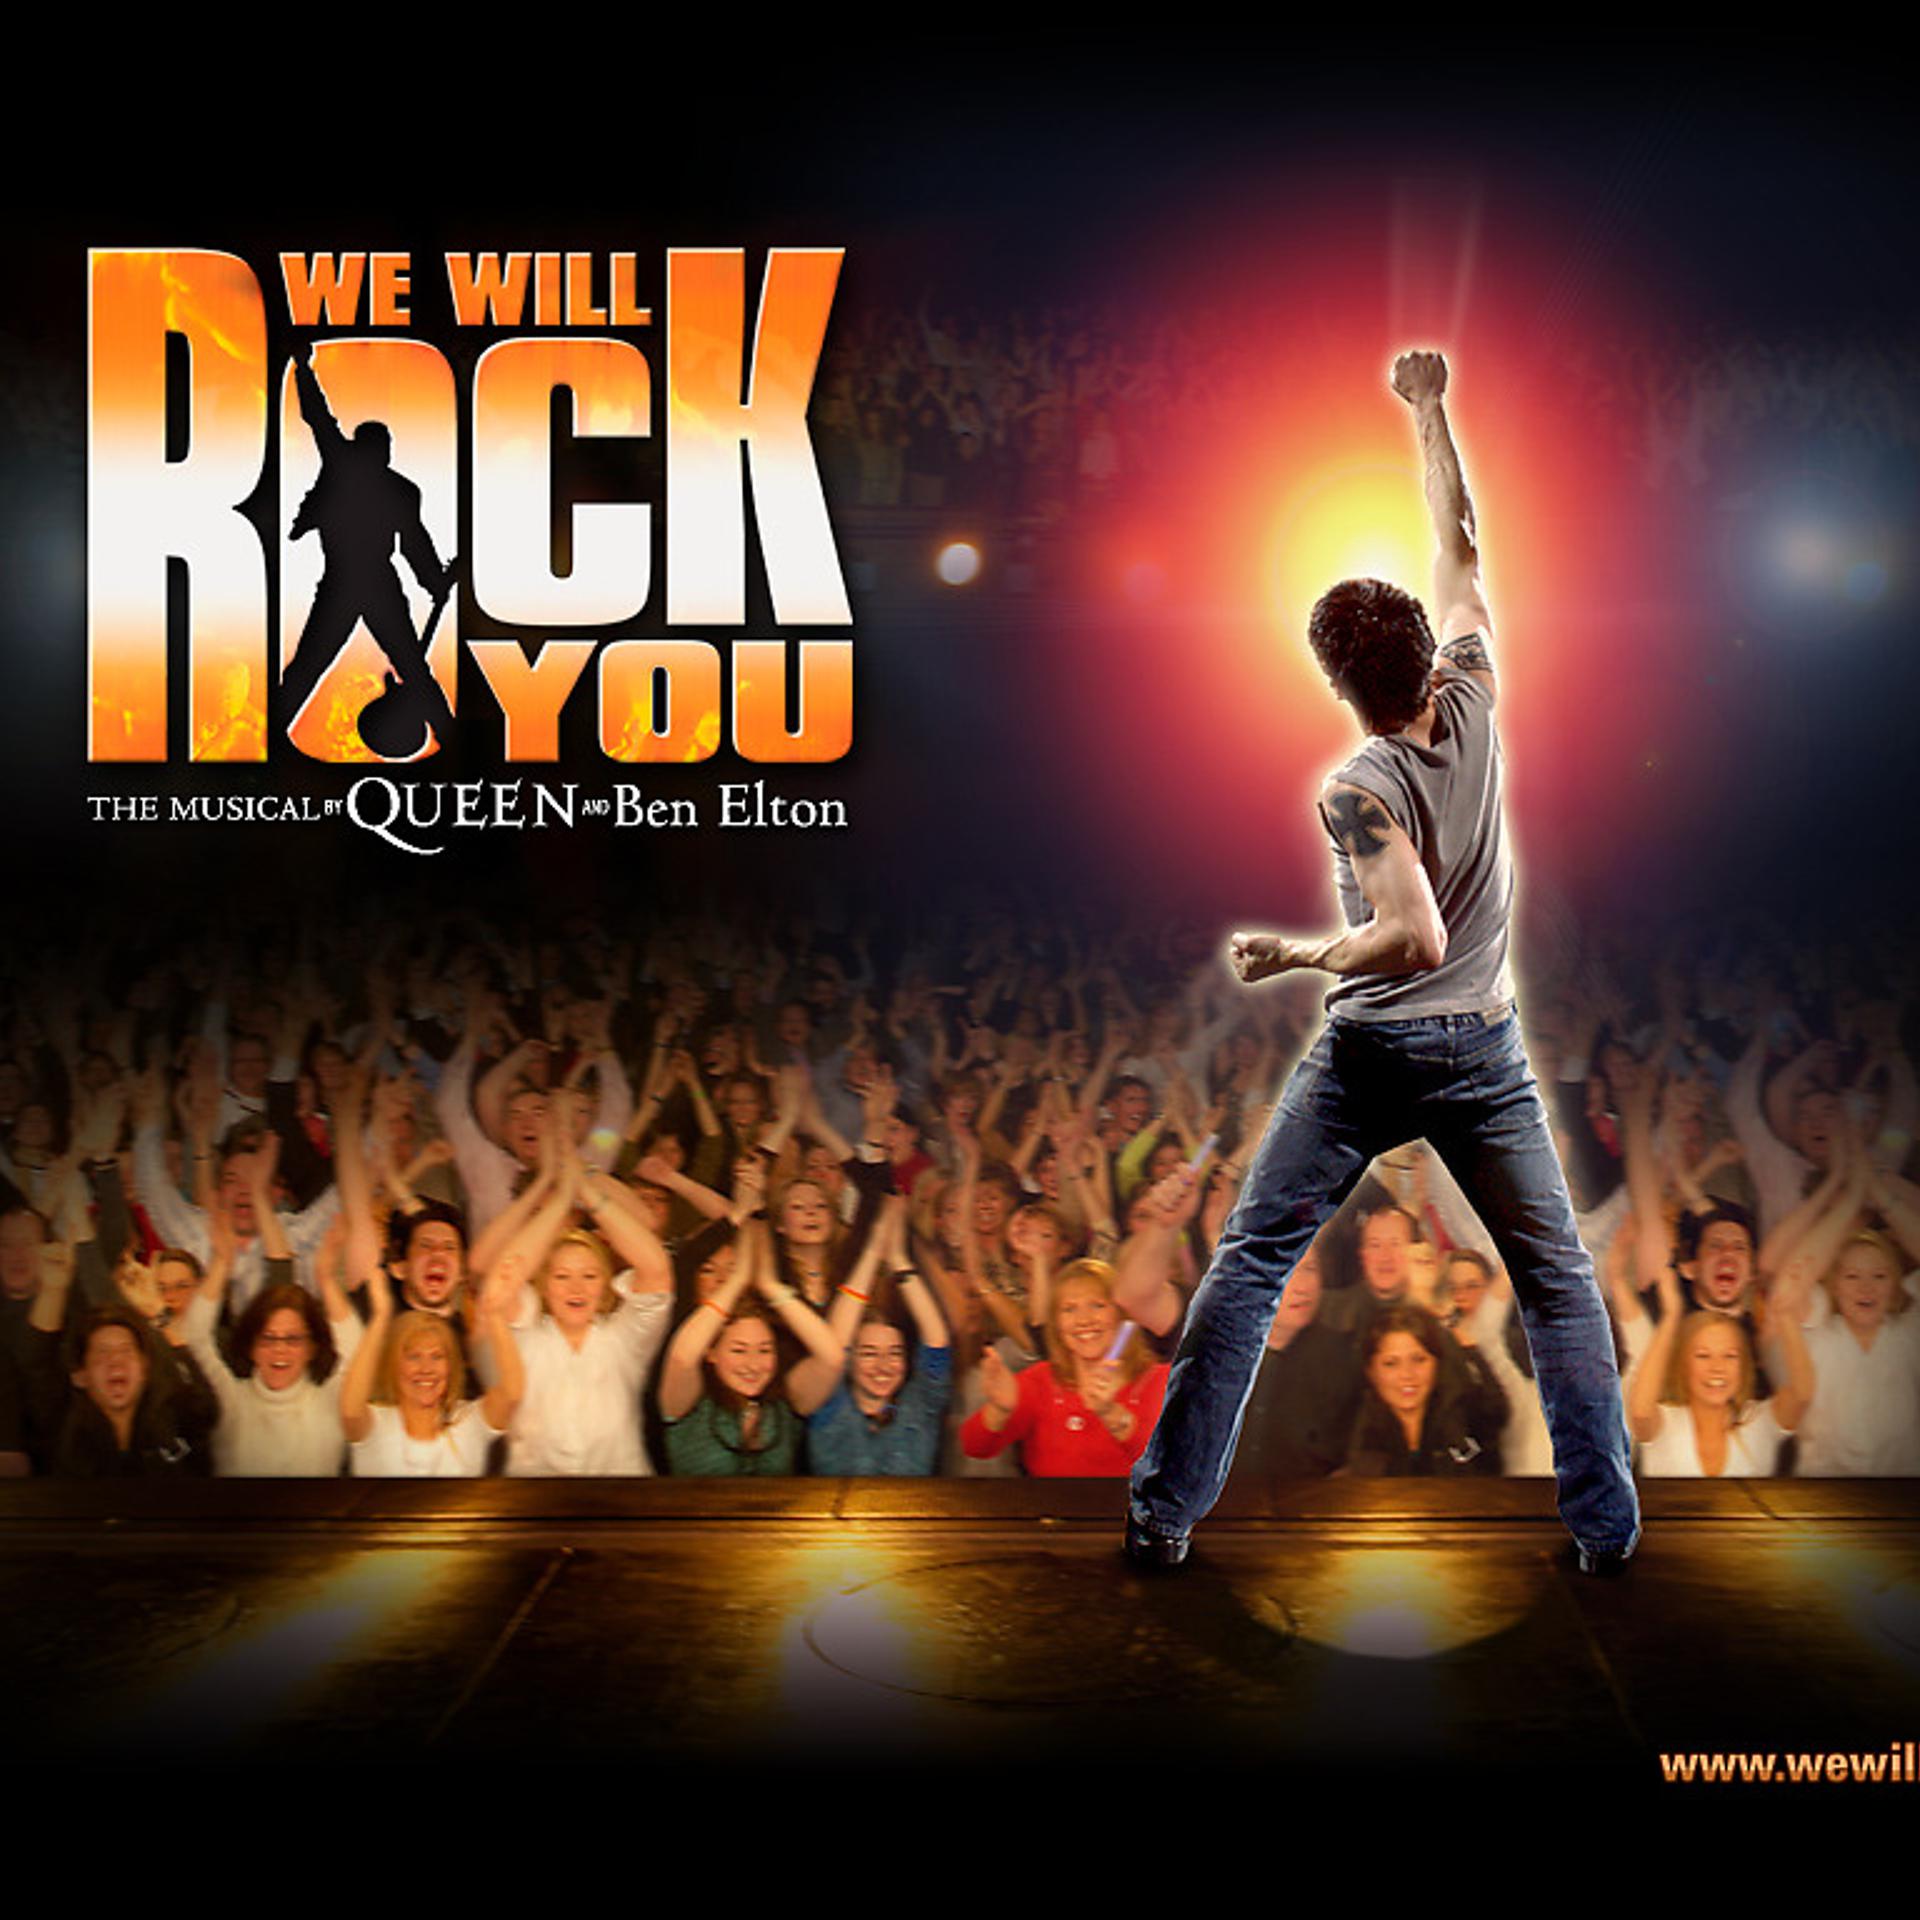 The Cast Of 'We Will Rock You' - фото